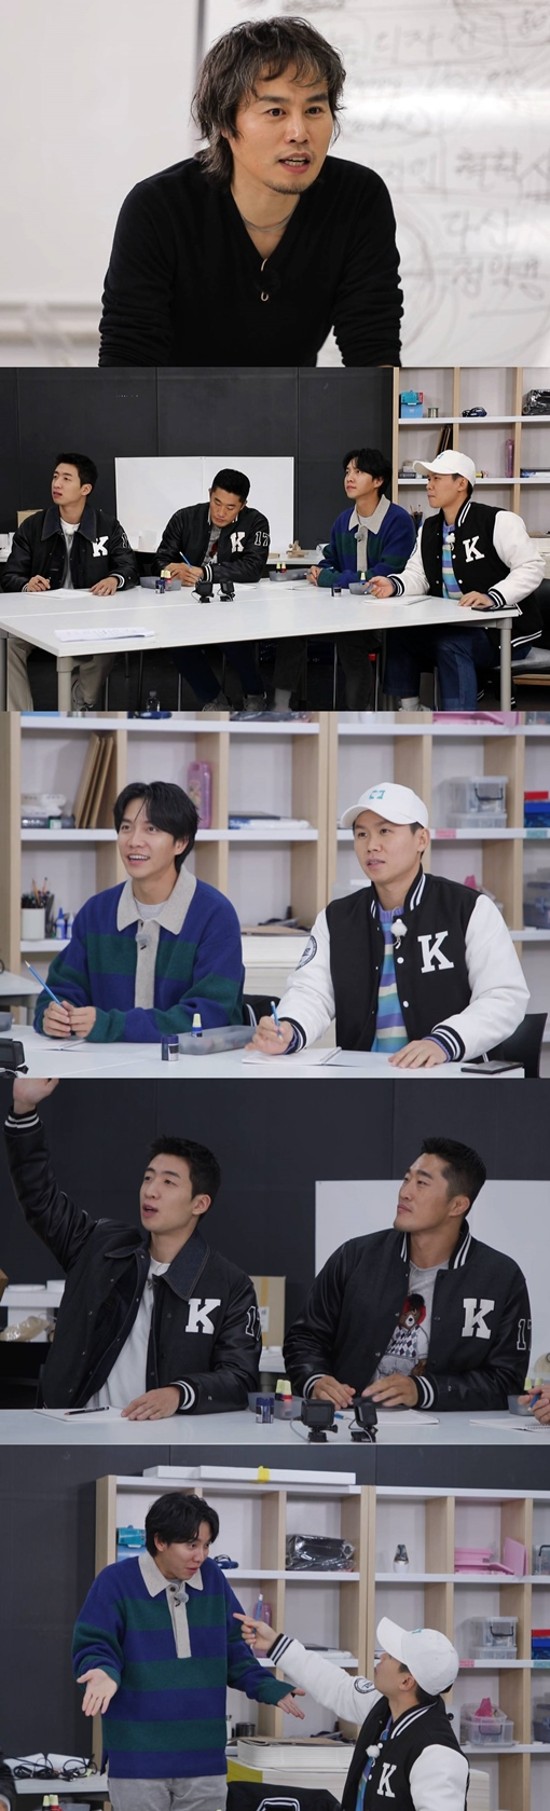 SBS All The Butlers, which will be broadcast on the 2nd, will feature Professor Bae Sang-min, who is a professor of KAIST Industrial Design and president of the design center of L major company, and is at the center of Korean industrial design.All The Butlers Lee Seung Gi, Yang Se Hyung, Kim Dong-Hyun, and Yoo Soo Bin visited the holy place of Korea Science and Technology to meet the master.All of the members are said to have visited KAIST for the first time and expressed their expectation for Haru to spend in KAIST, saying, I will be here for the first time.The master Bae Sang-min, who appeared, said that he designed the inside of the industrial design department and visited the inside of the KAIST with the members.All of the members were impressed by the various products designed by the master such as the toilet logo.In particular, the master said that it was requested by the state, and it surprised the scene by first releasing the products that have not yet been marketed.KAISTs personal design products tailored to the Corona city are expected to be.In addition, the Master, who was a professor at the Parsons Design School, the United States of Americas three major design schools, unveiled the unique education method of the United States of Americas prestigious design school.I have it and I love it The master said that he could teach with only two Re-Ments, and the members were told that they had made two Re-Ments in all kinds of situations and made the scene laugh.The master explained, In United States of America, I was a Desiigner who made pretty garbage, and explained the design to live together and the sharing design that contains the philosophy of the master.The members also deeply sympathized with the philosophy of the master and thought. The design philosophy of the master draws attention to what kind of impression the members gave.Special Haru in KAIST with Master Desiigner Bae Sang-min, which is being watched by the world, can be found in All The Butlers, which is broadcasted at 6:30 pm on the 2nd.Photo: SBS